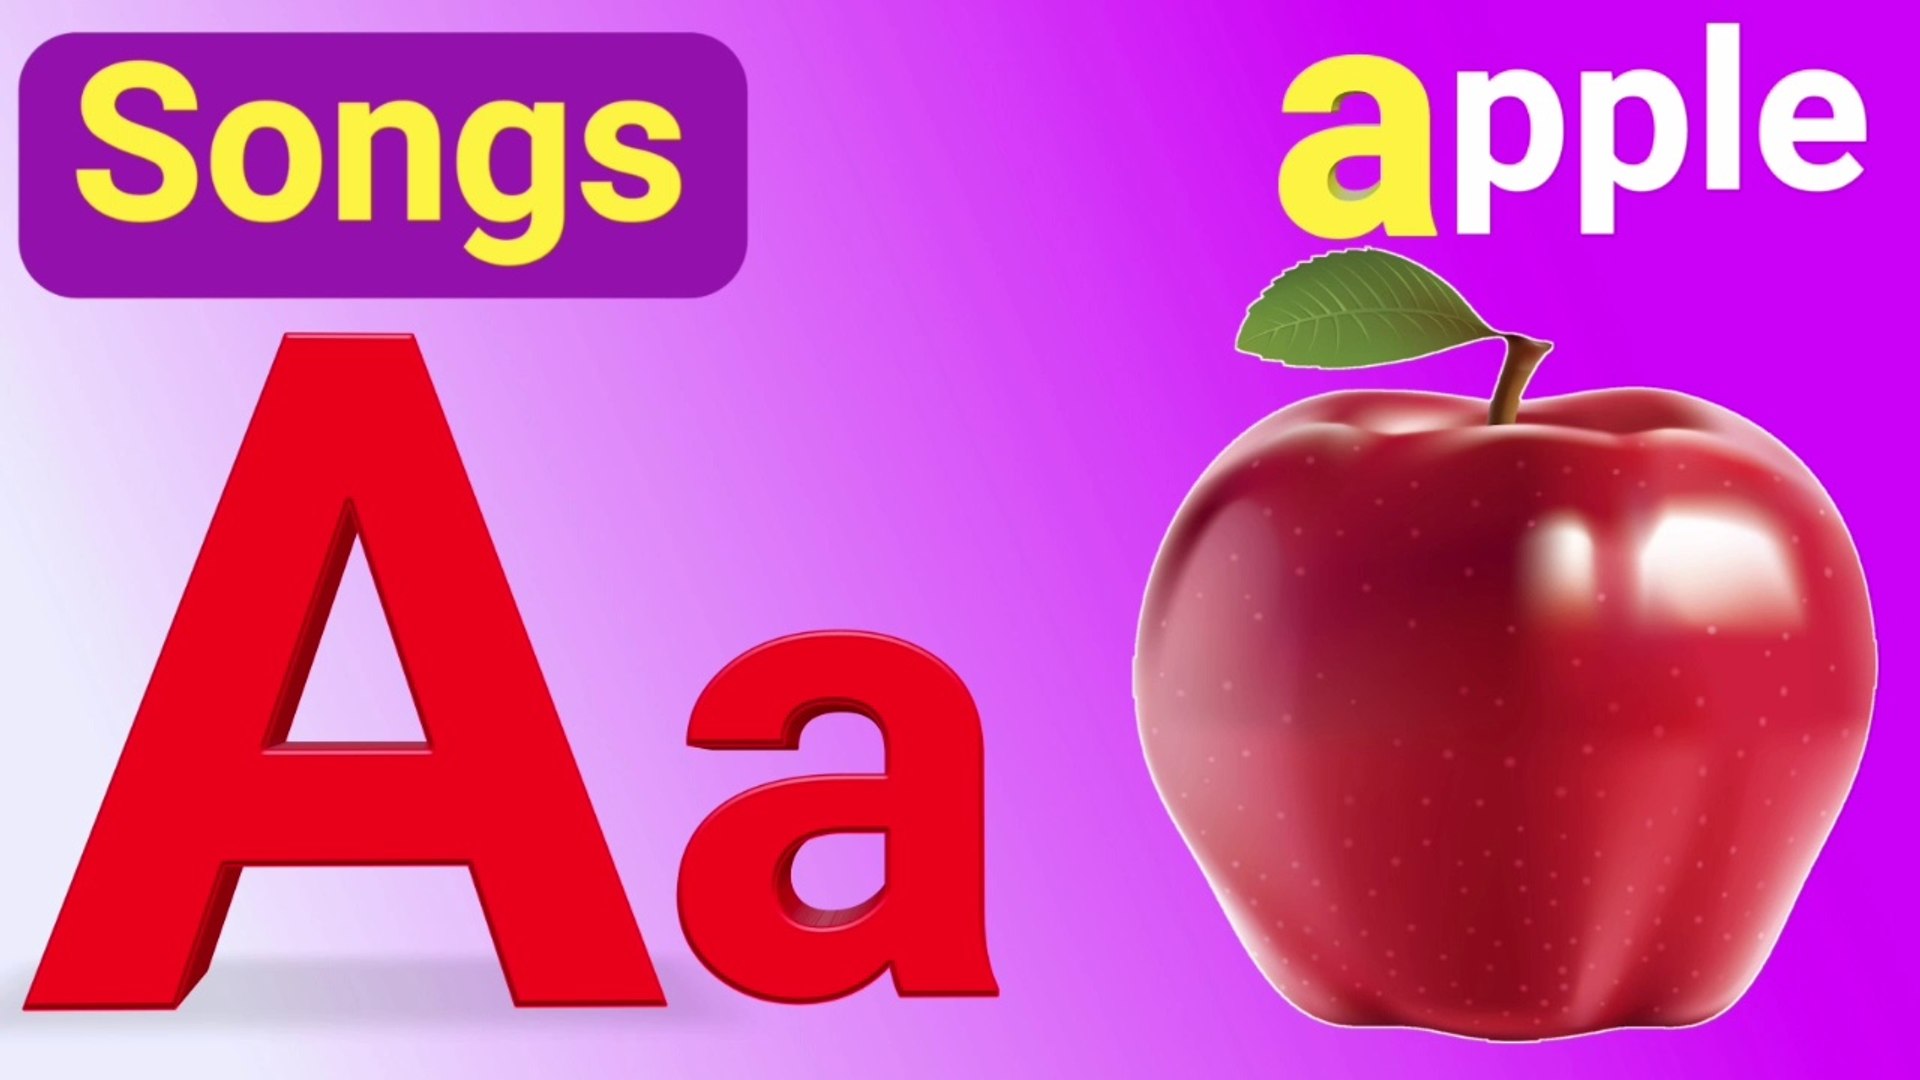 A For Apple B For Ball Alphabets Phobics Sounds With Image Two Wordalphabet Video Alphabet Videos For Kids Alphabet Videos For Preschoolers Alphabet Video Kaise Banaye Abc Alphabet Song Abc Alphabet Learning Abc Alphabet